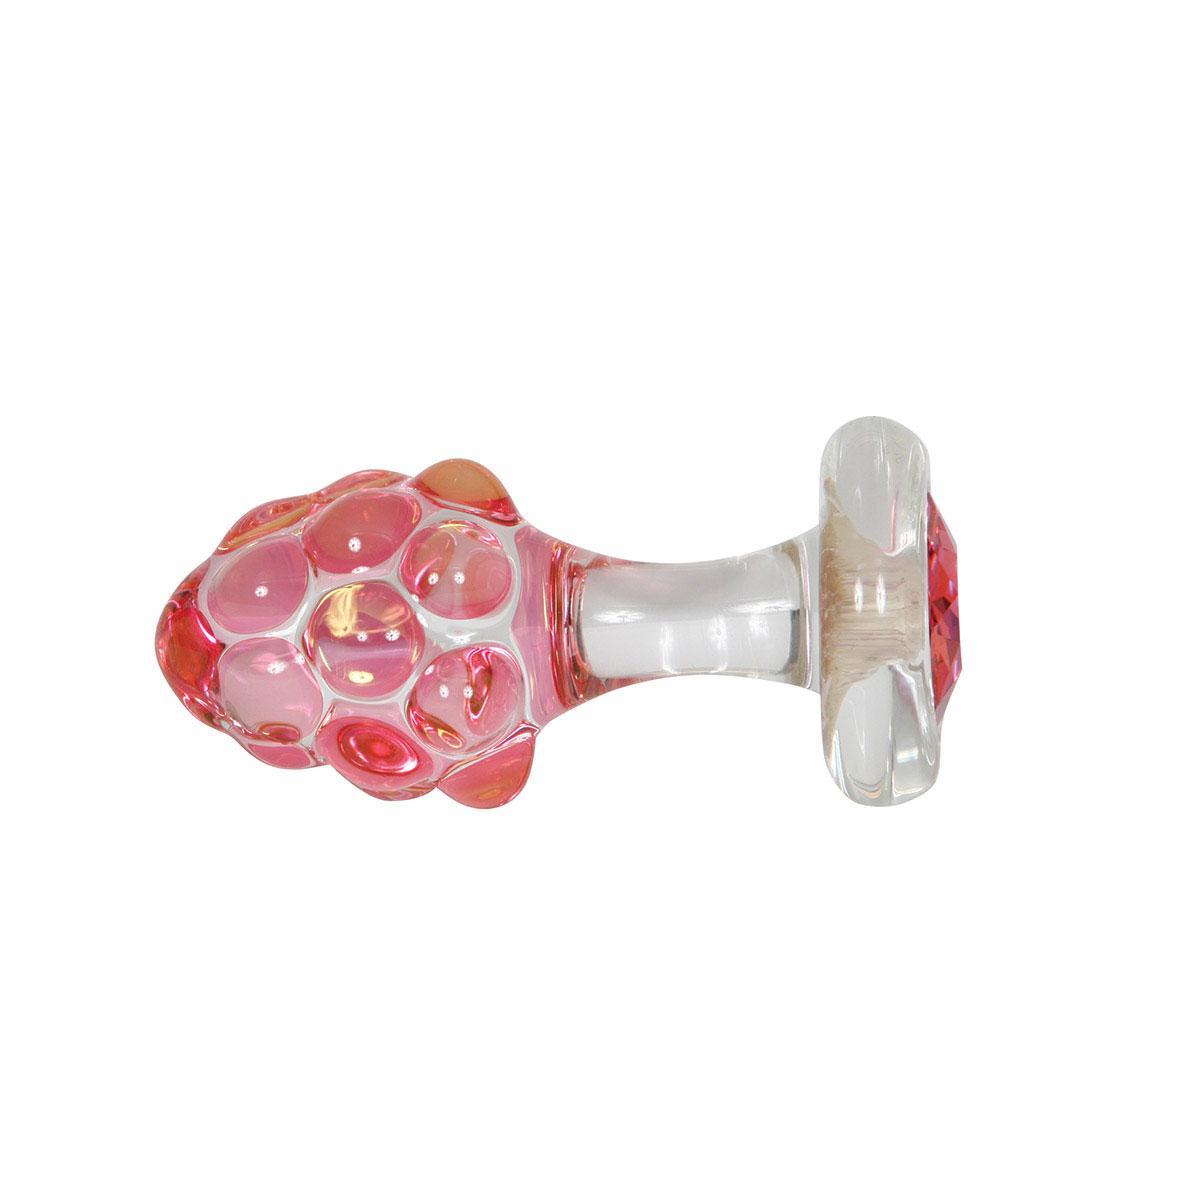 Crystal Delights Pineapple Delight Plug Pink Crystal - Buy At Luxury Toy X - Free 3-Day Shipping